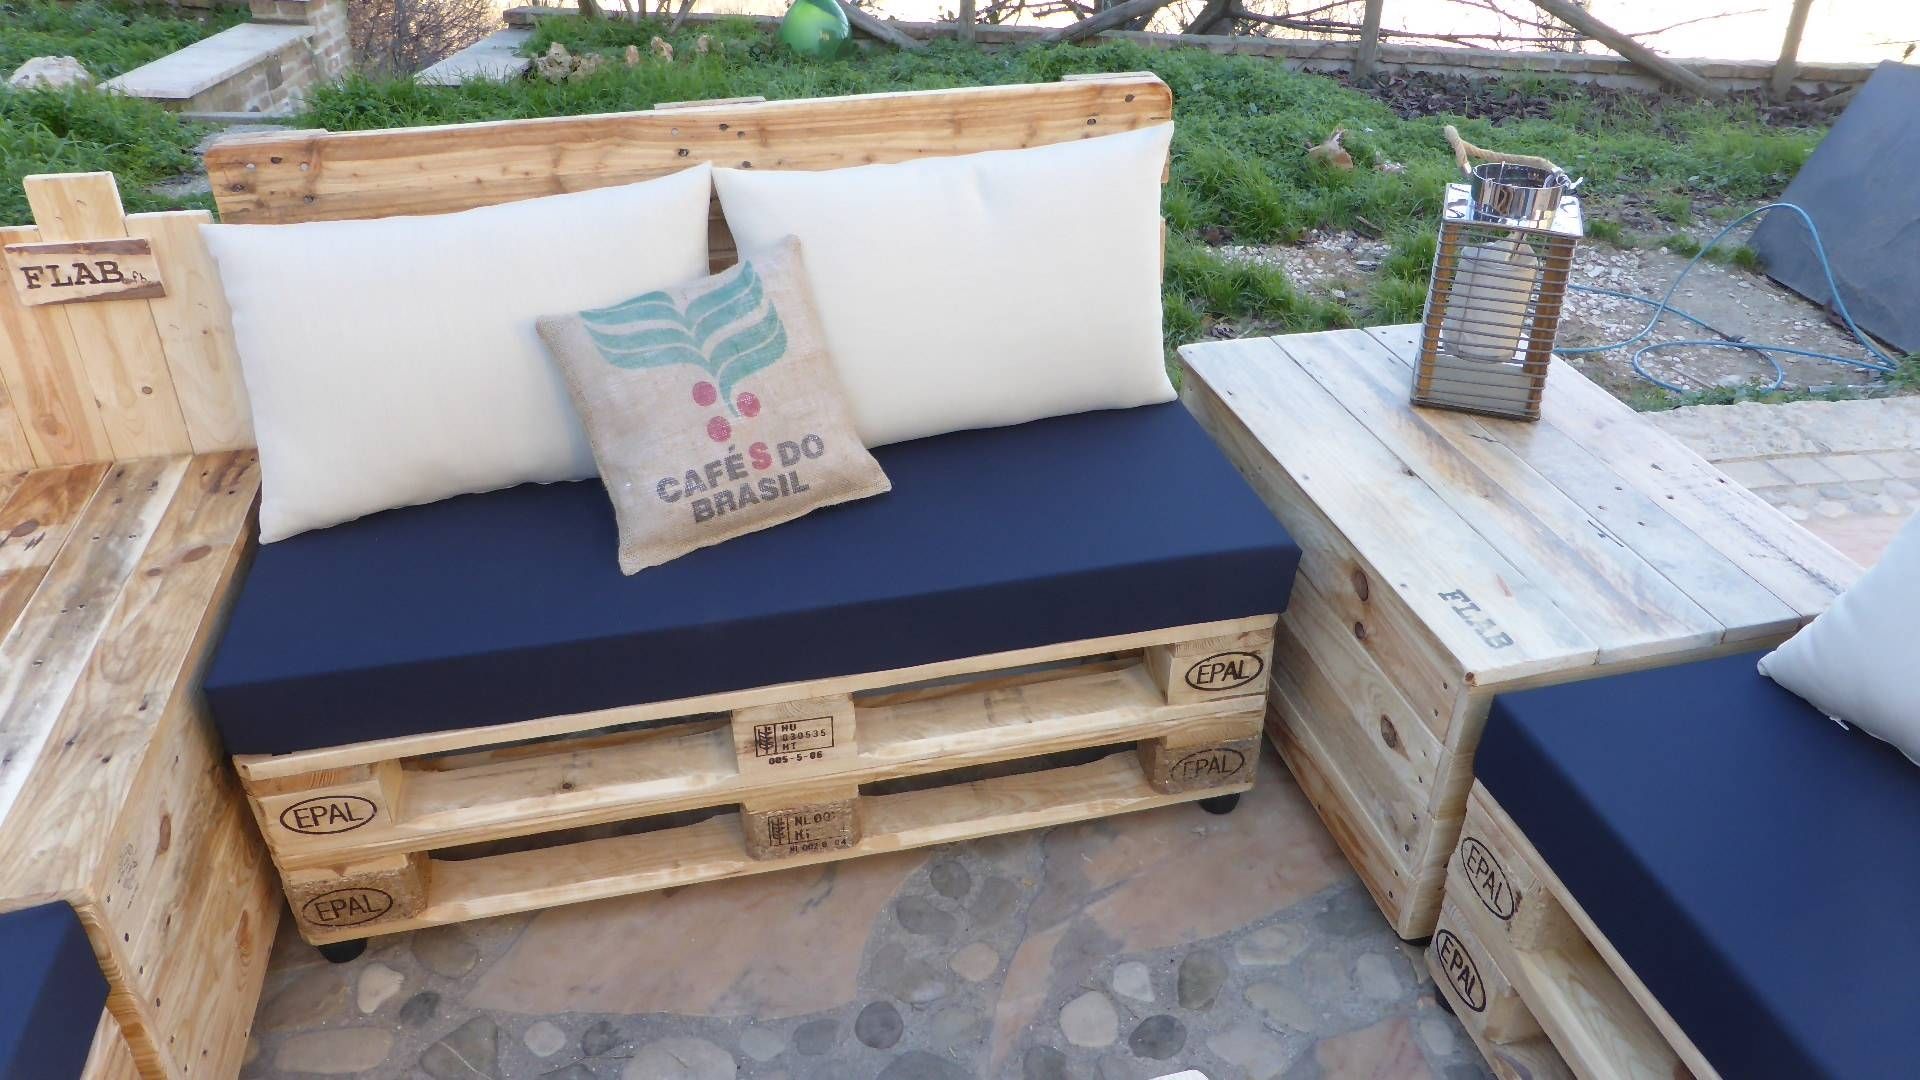 Diy Pallet Couches & Outdoor Pallet Furniture • 1001 Pallets With Pallet Sofas (View 8 of 15)